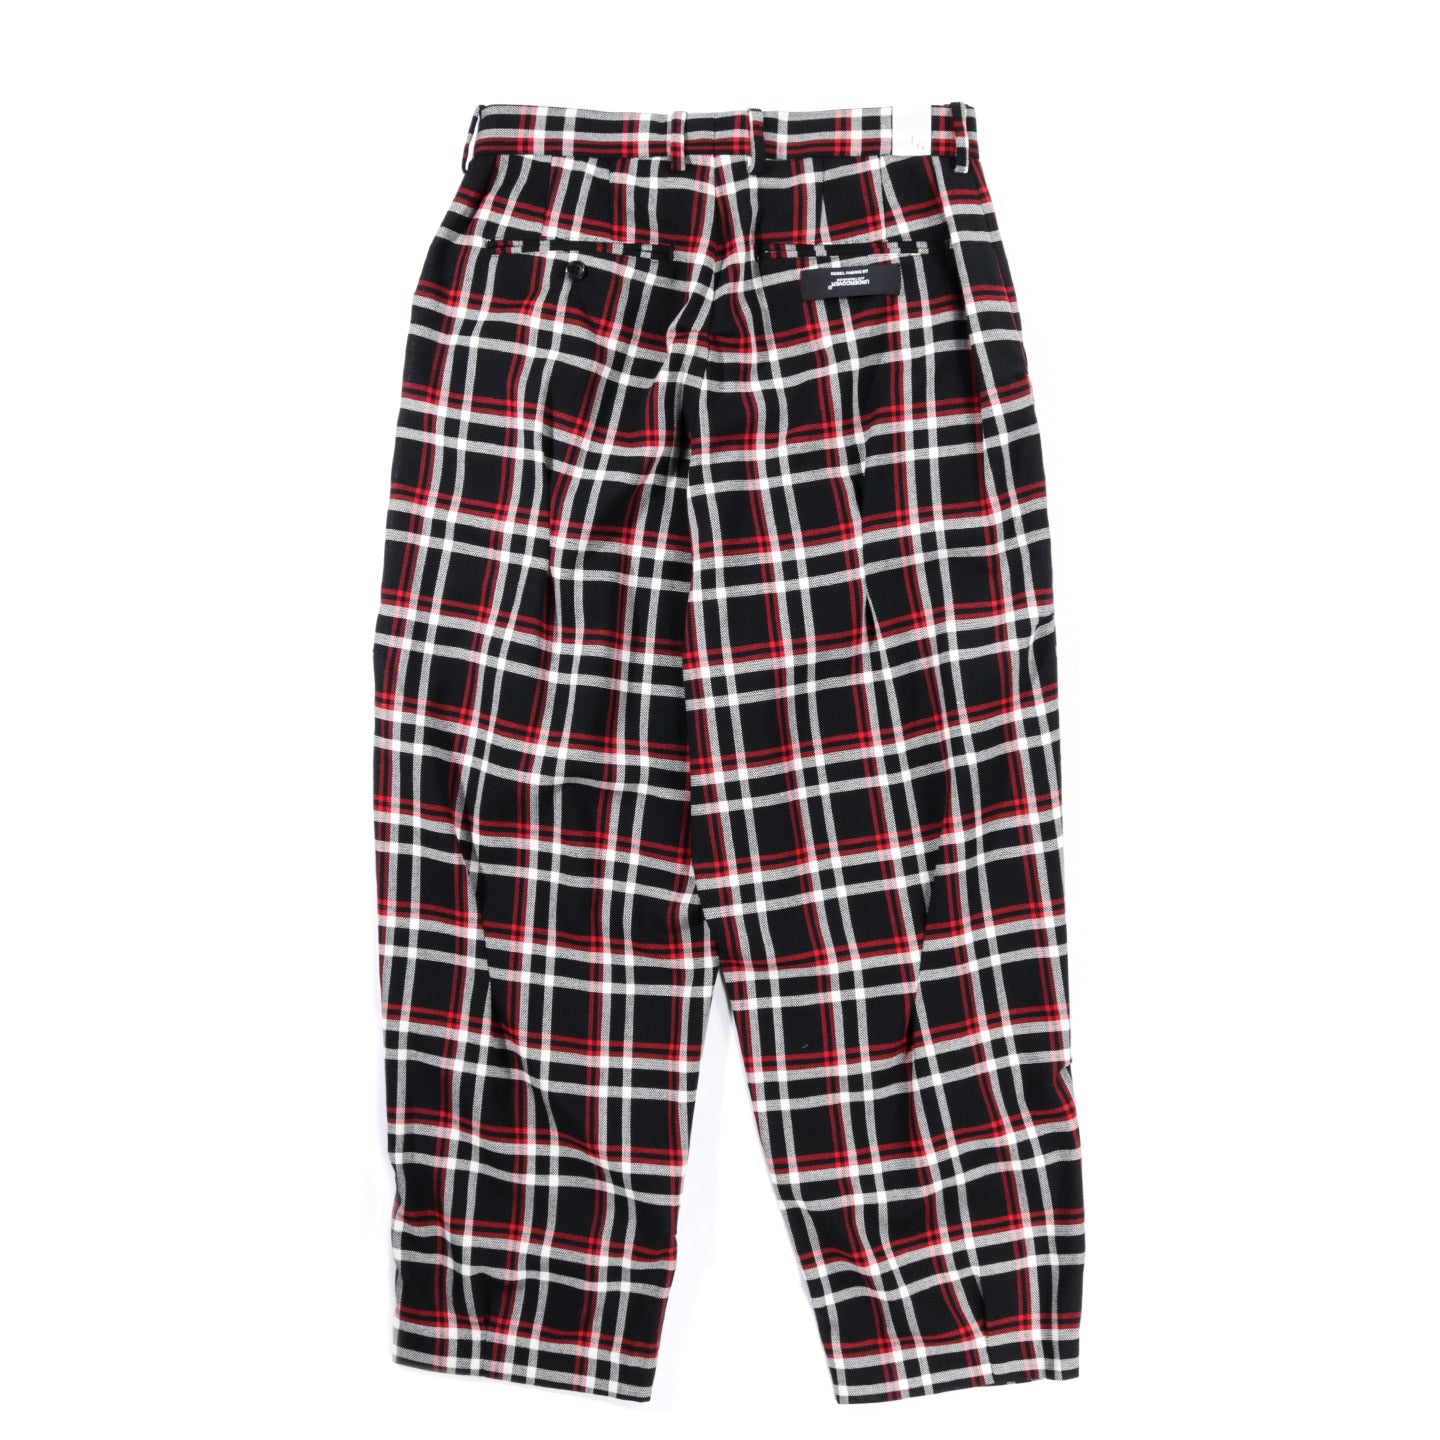 N.HOOLYWOOD 1201-PT06 UNDERCOVER PANTS BLACK CHECK